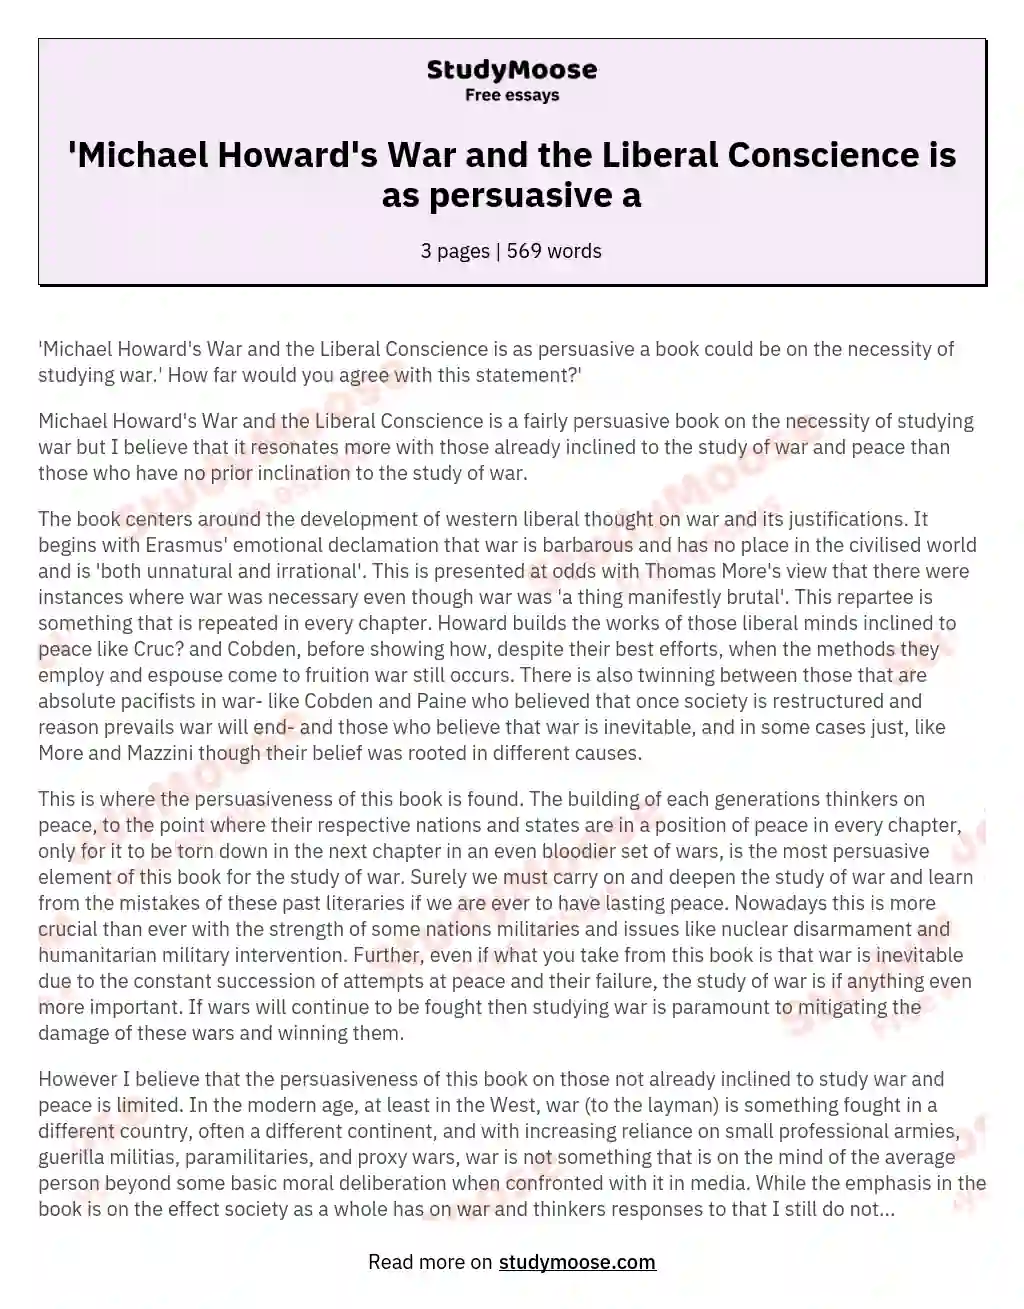 'Michael Howard's War and the Liberal Conscience is as persuasive a